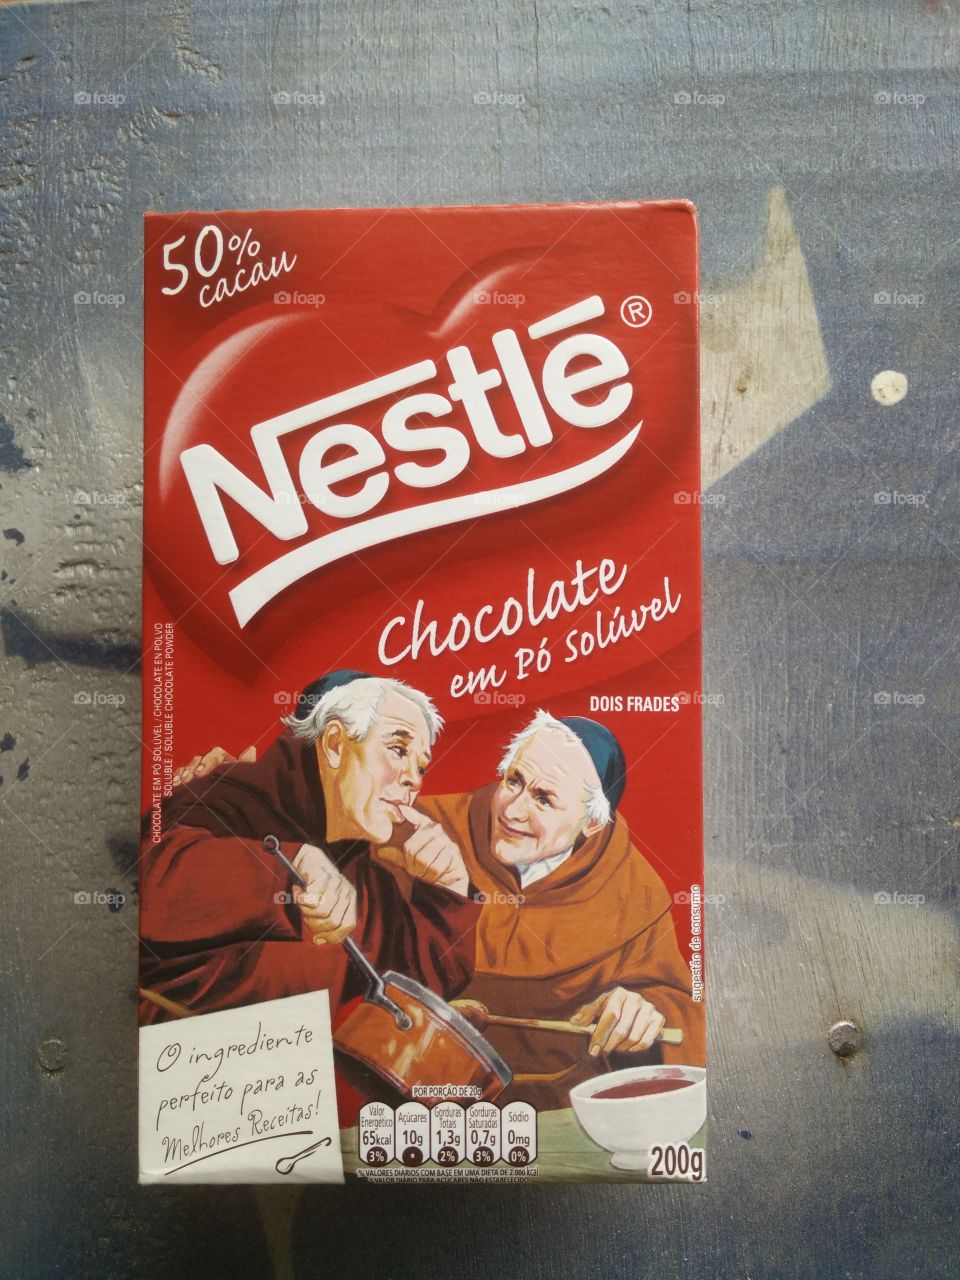 LGBT.  Homosexual Jesuit monks try cocoa and advertise hot chocolate.  Transparent hints and advertisements on the Nestlé cocoa box.